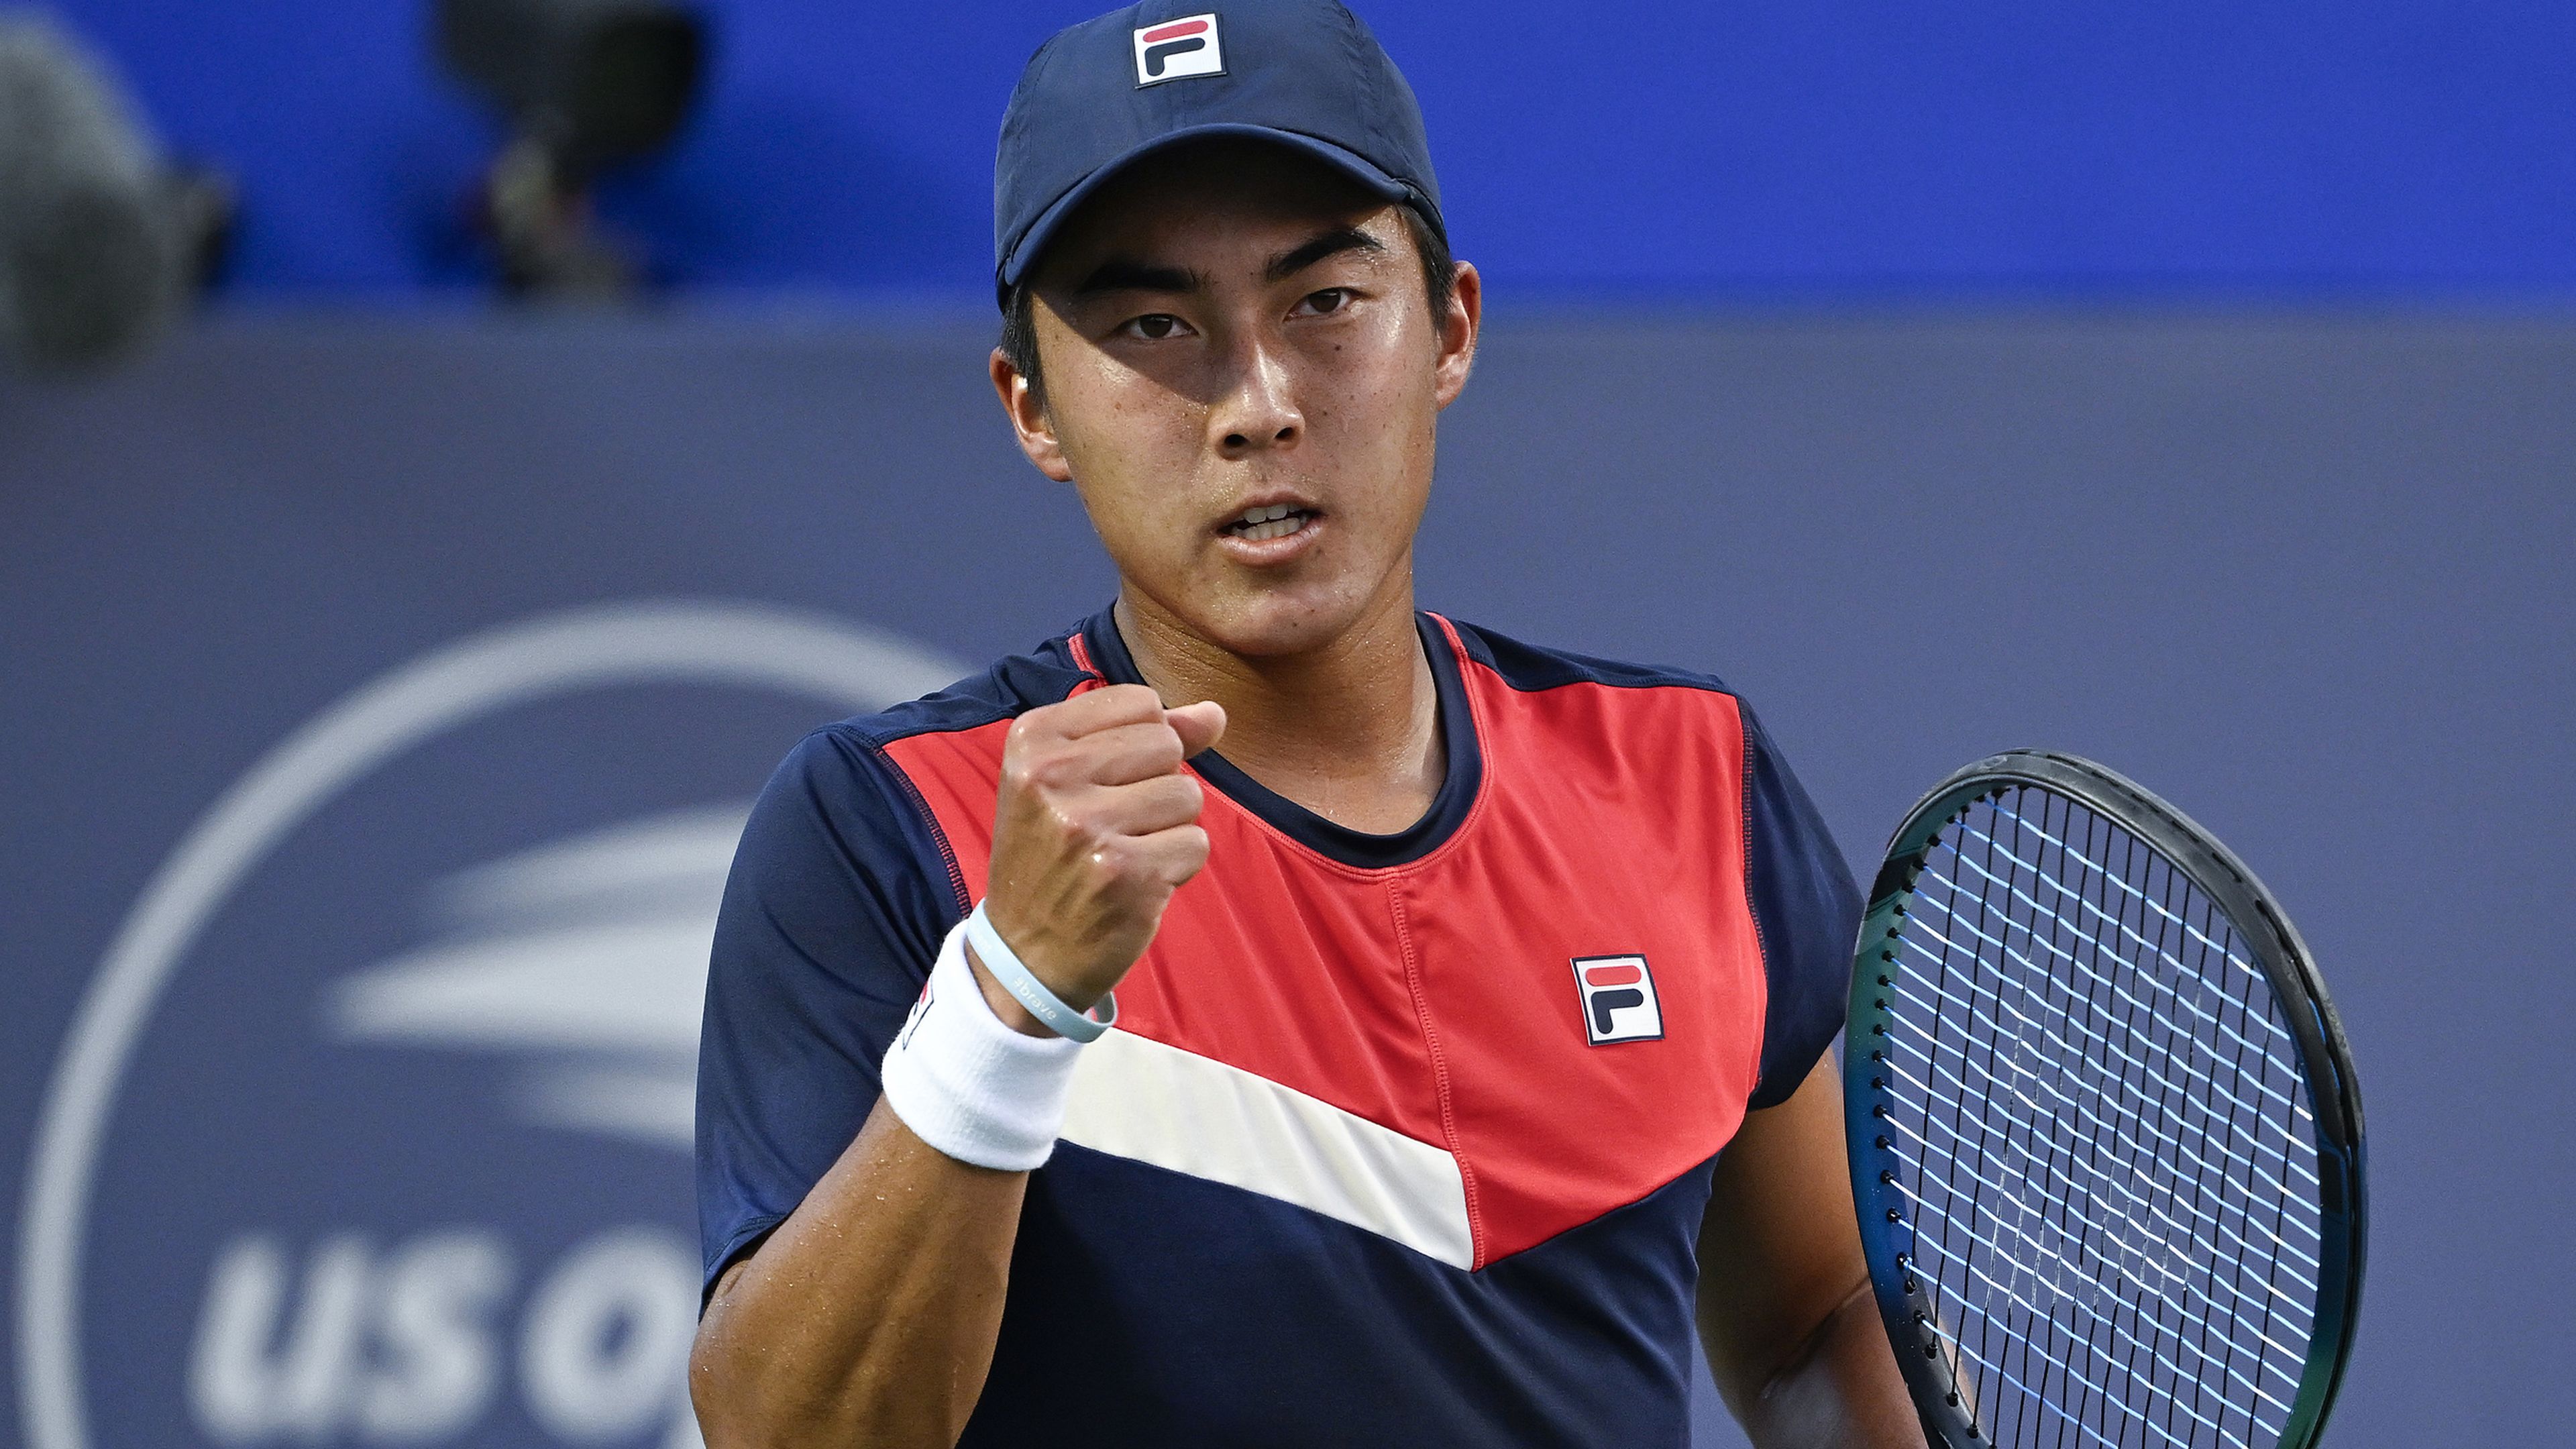 WINSTON SALEM, NORTH CAROLINA - AUGUST 22: Rinky Hijikata of Australia reacts during his match against Bona Coric of Croatia in the second round of the Winston-Salem Open at Wake Forest Tennis Complex on August 22, 2023 in Winston Salem, North Carolina. (Photo by Grant Halverson/Getty Images)